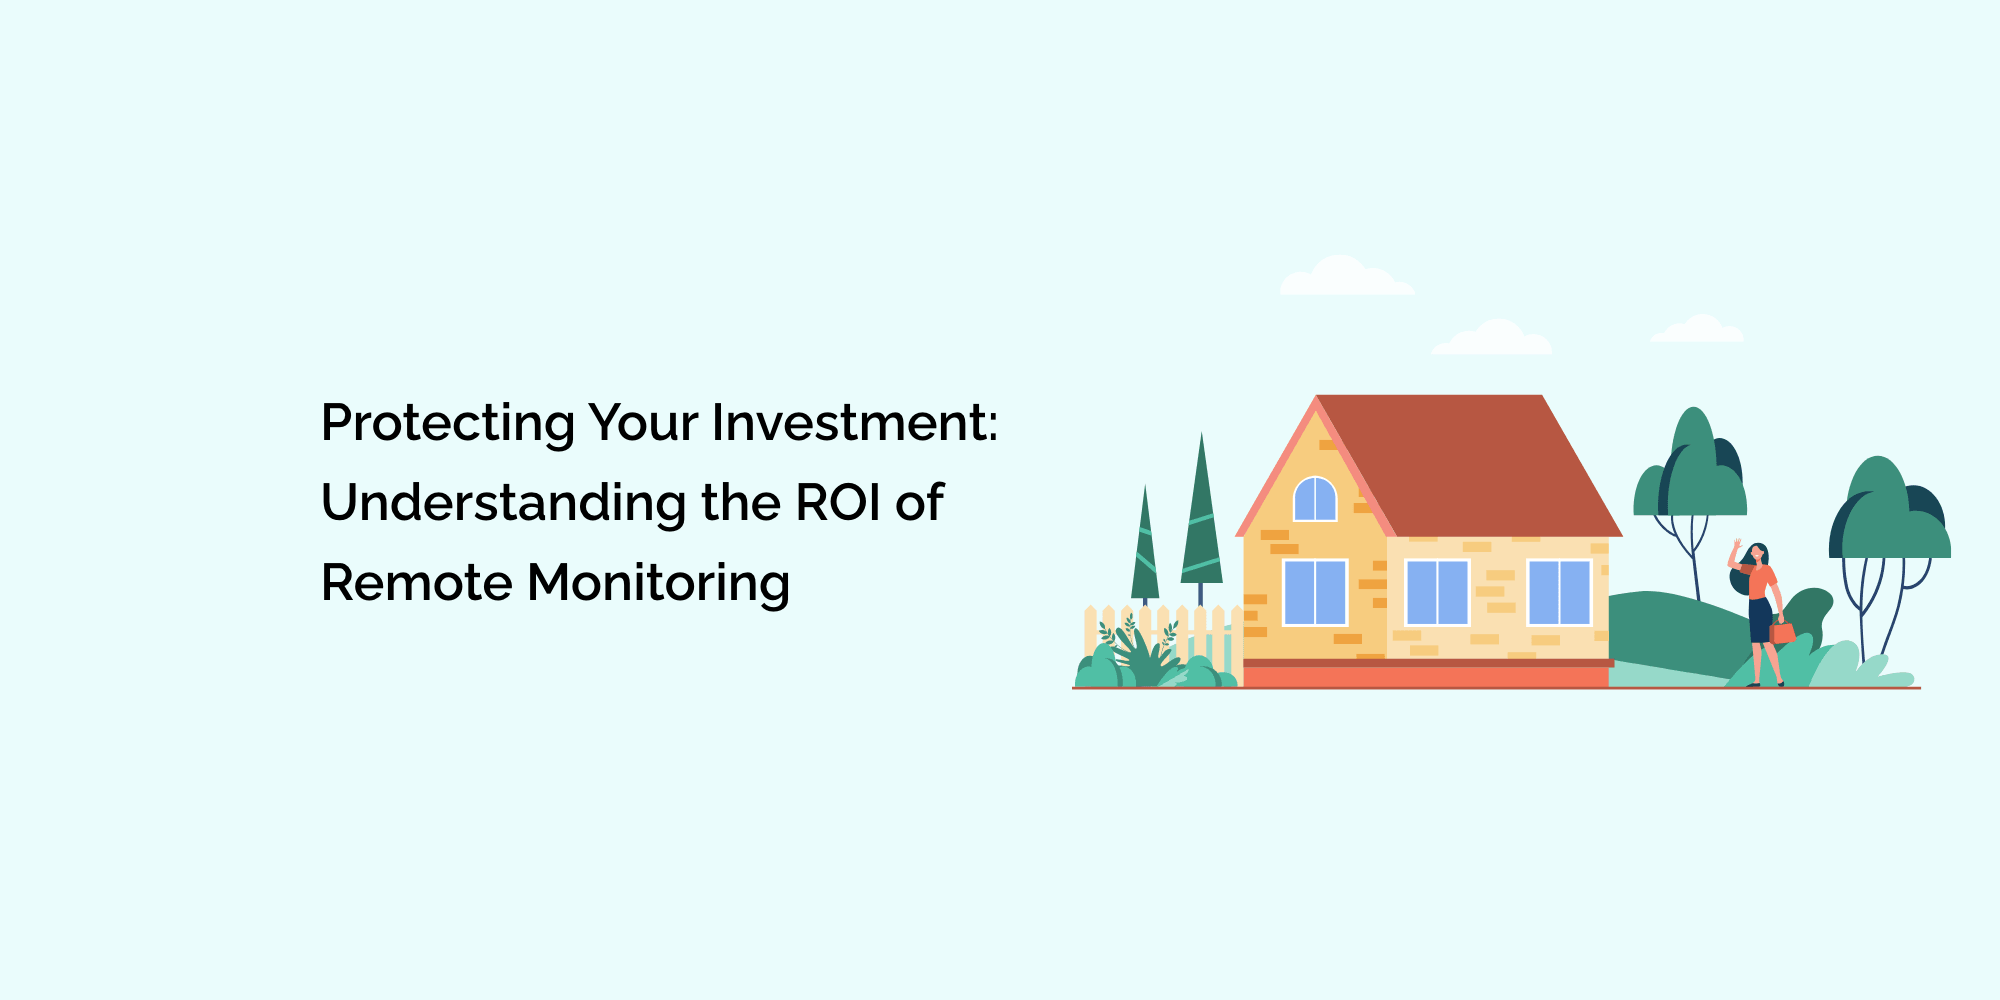 Protecting Your Investment: Understanding the ROI of Remote Monitoring